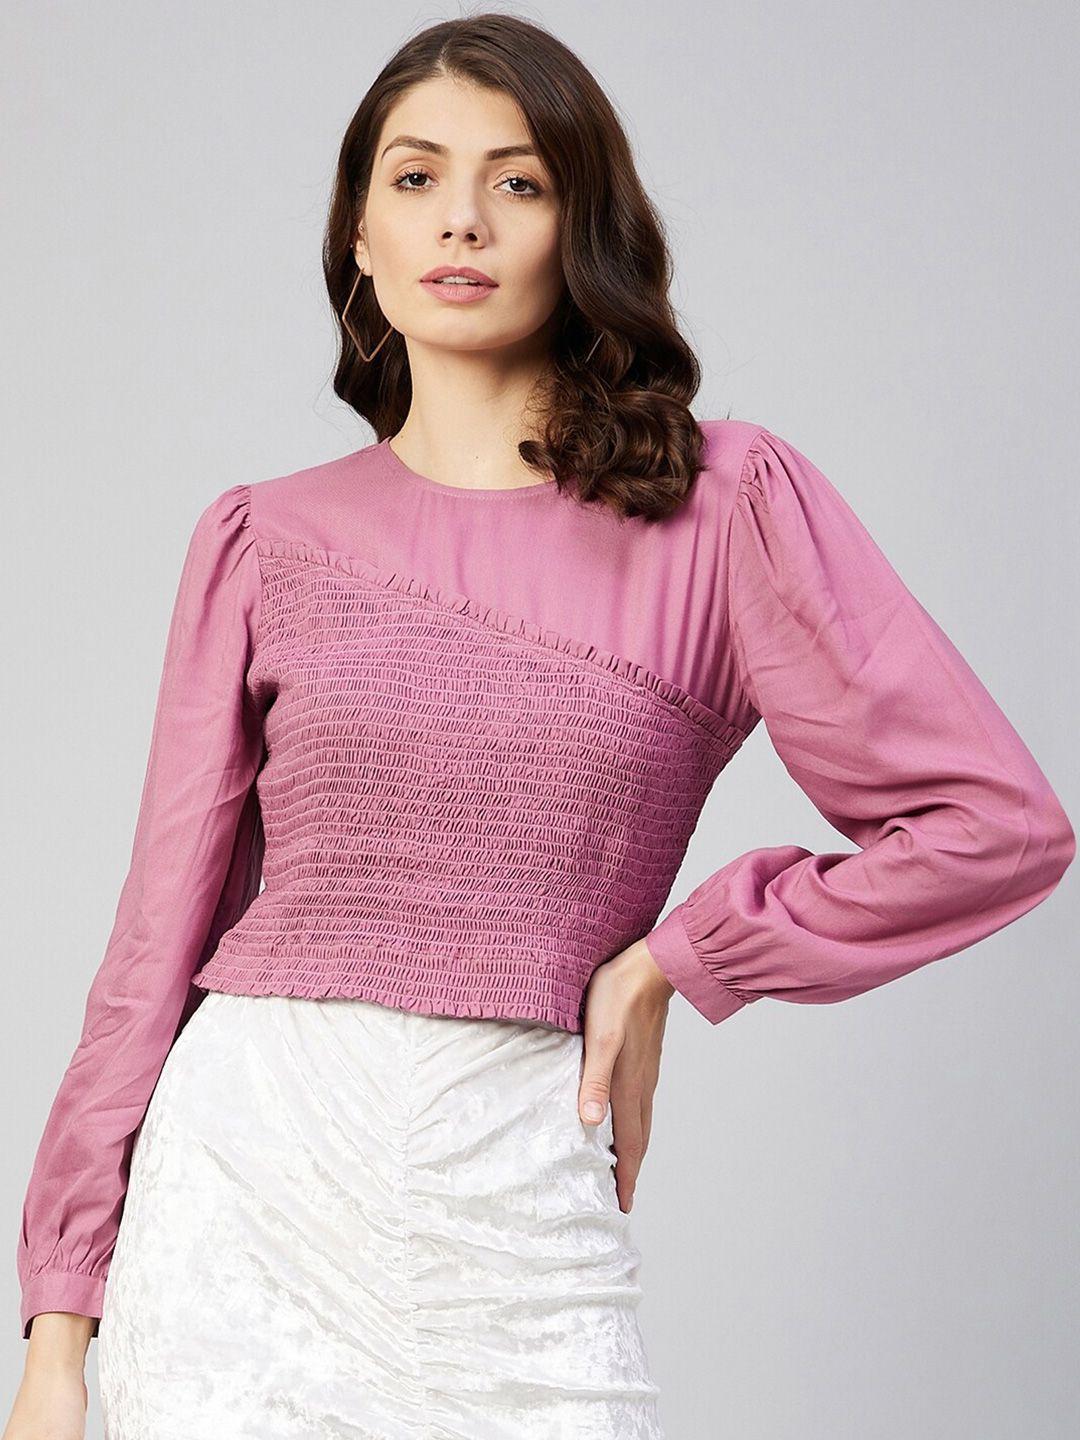 marie-claire-mauve-solid-crop-top-with-smocking